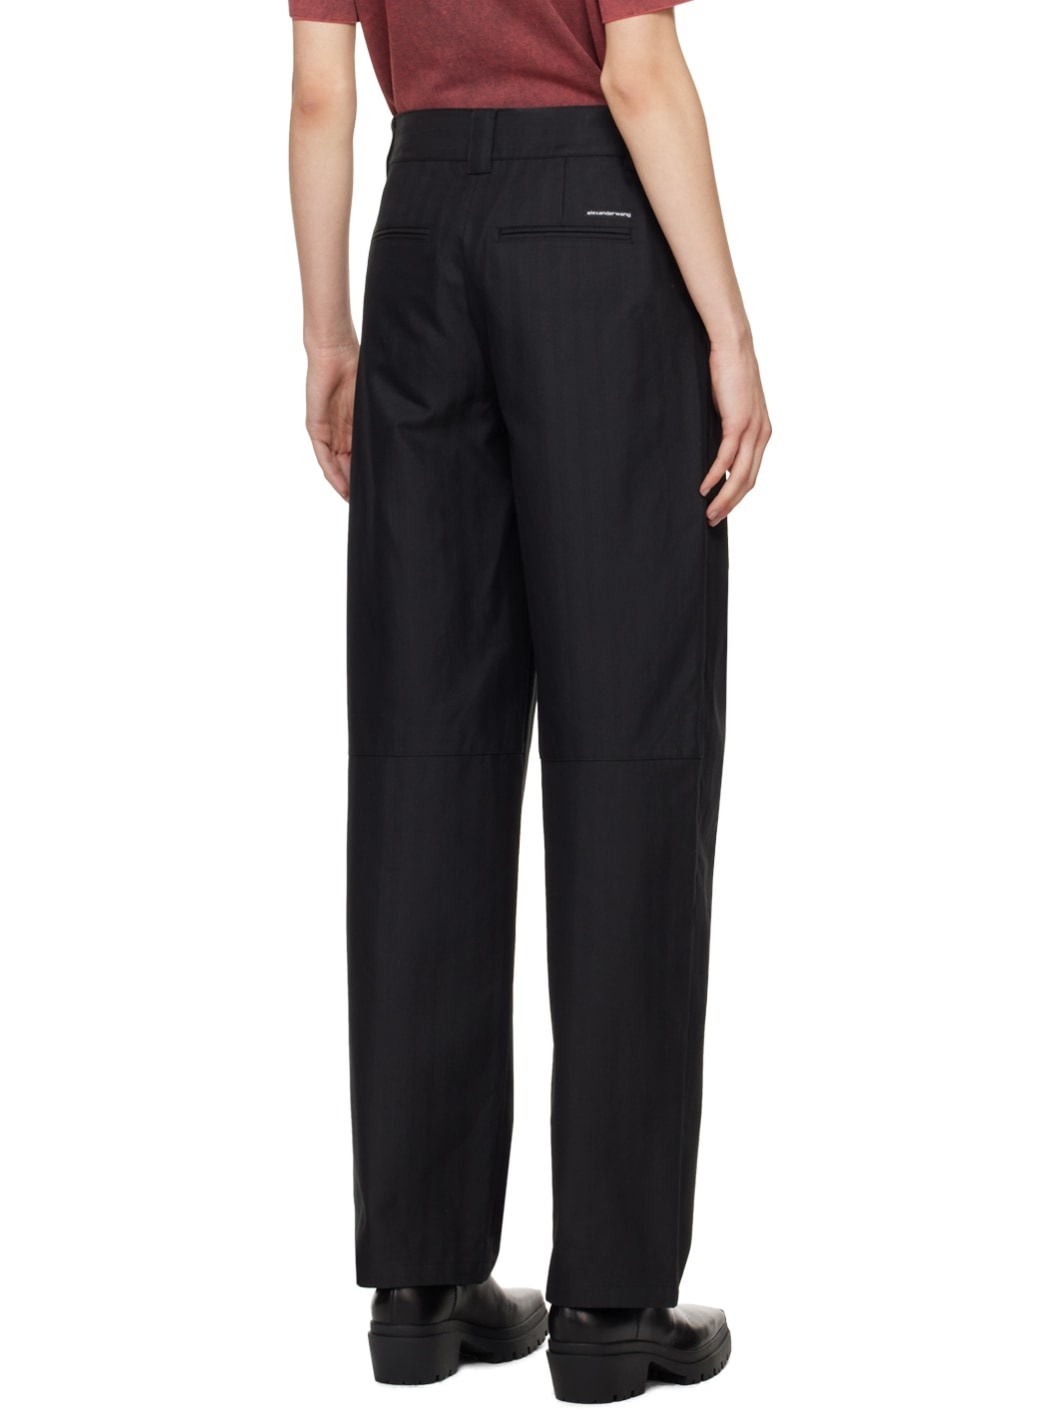 Black Tailored Trousers - 3